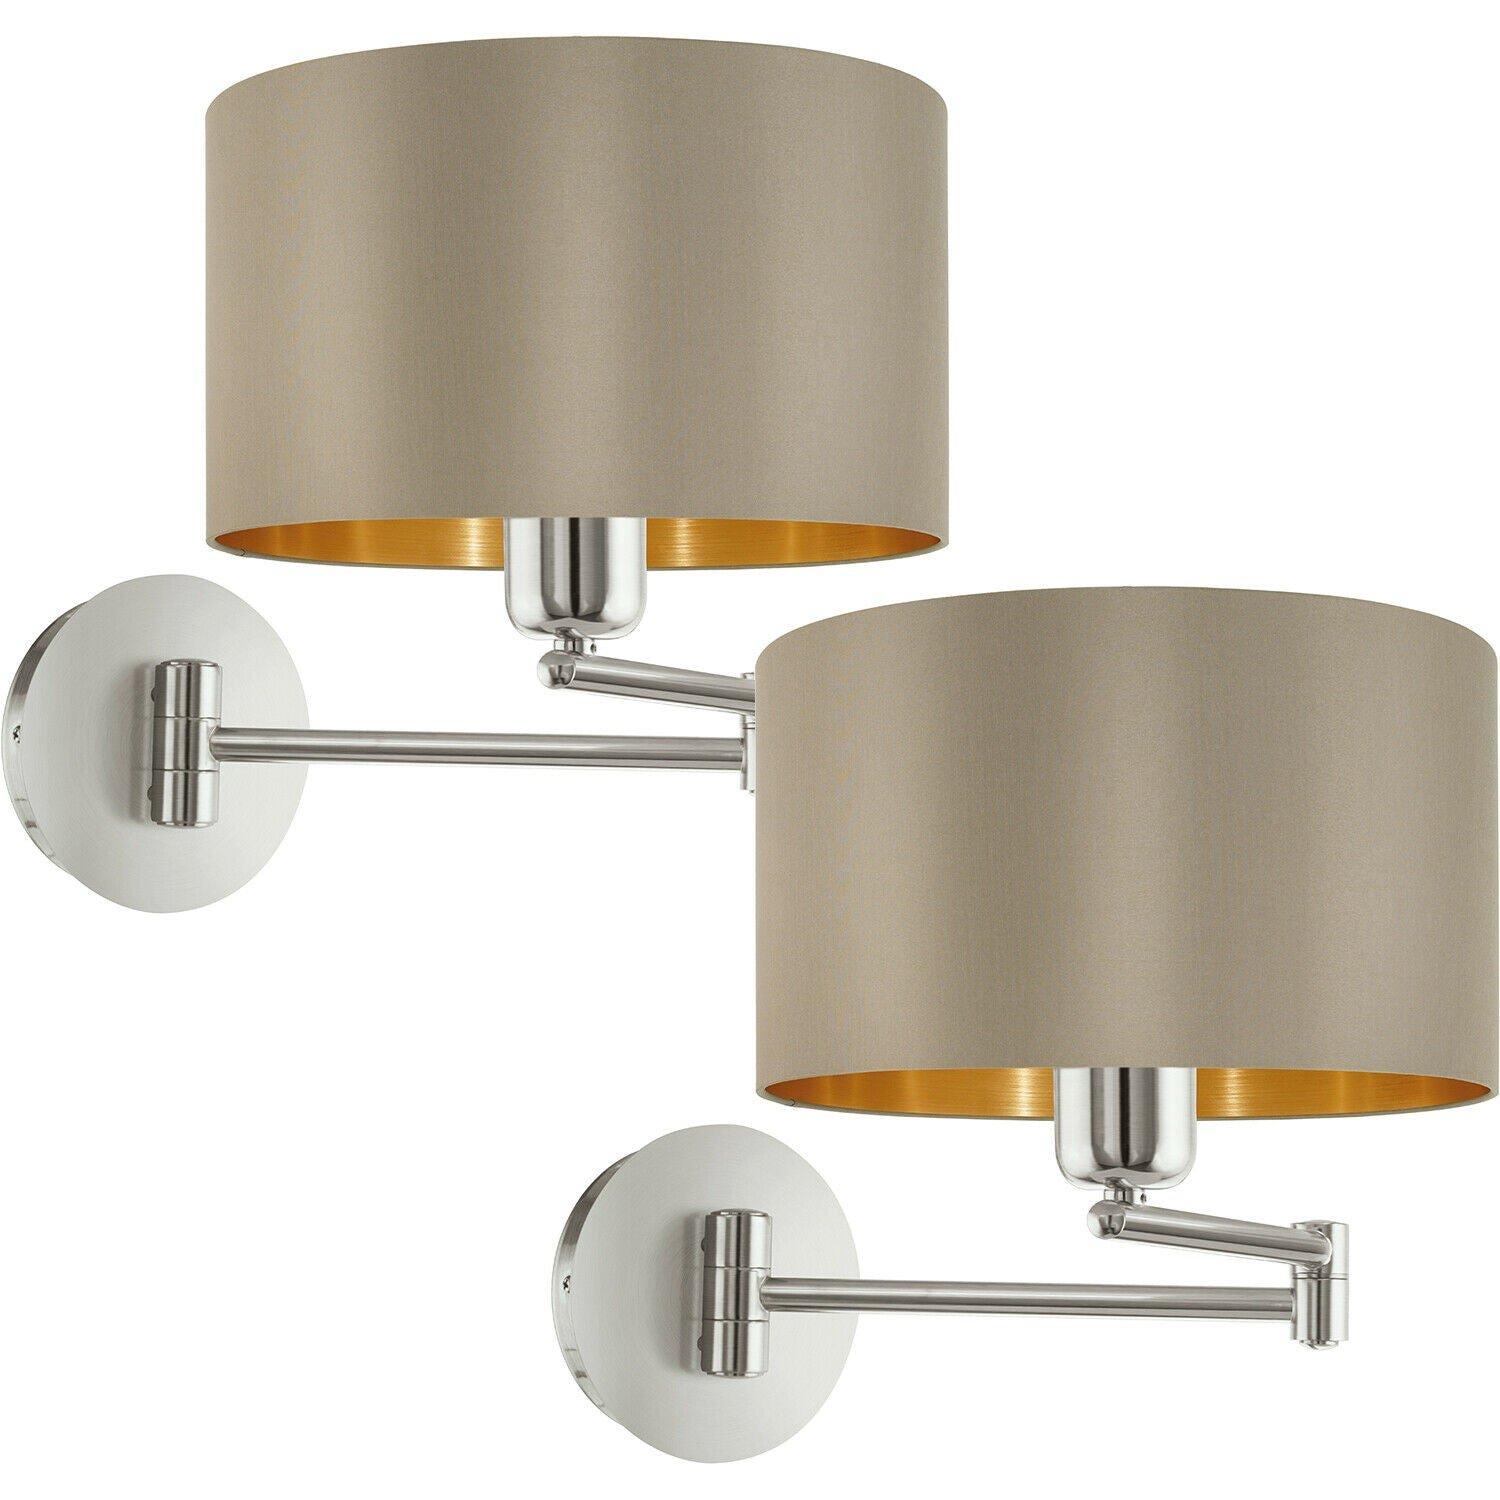 2 PACK Wall Light Satin Nickel Moveable Stem Shade Taupe Gold Fabric E27 1x60W